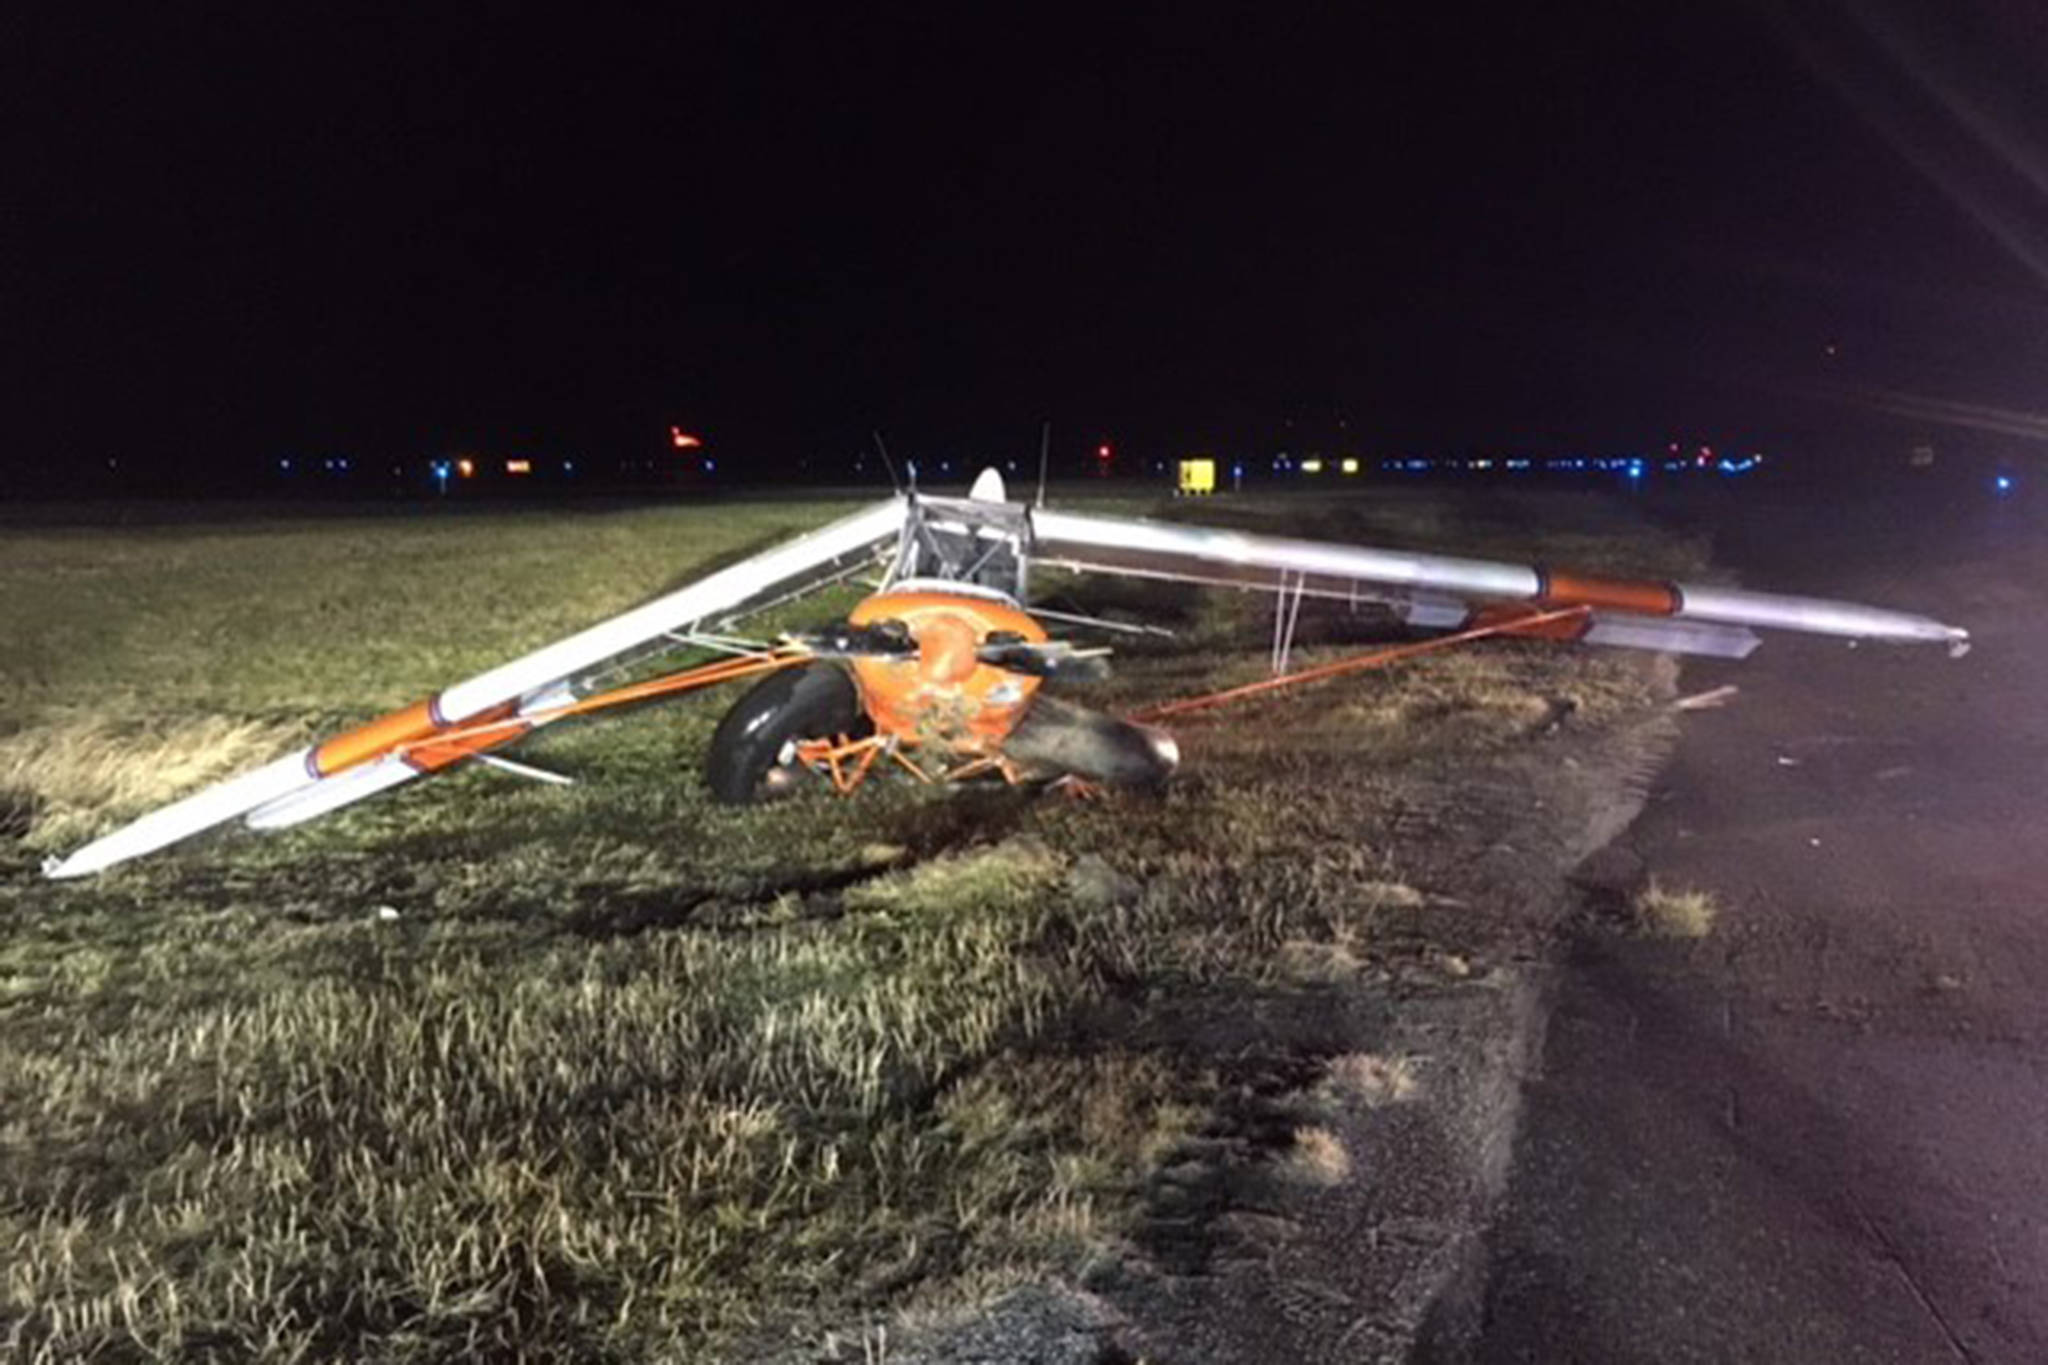 Capital City Fire/Rescue responded after a personal aircraft was destroyed by high winds while taxiing at Juneau International Airport Wednesday afternoon, Dec. 2, 2020. (Courtesy photo / CCFR)